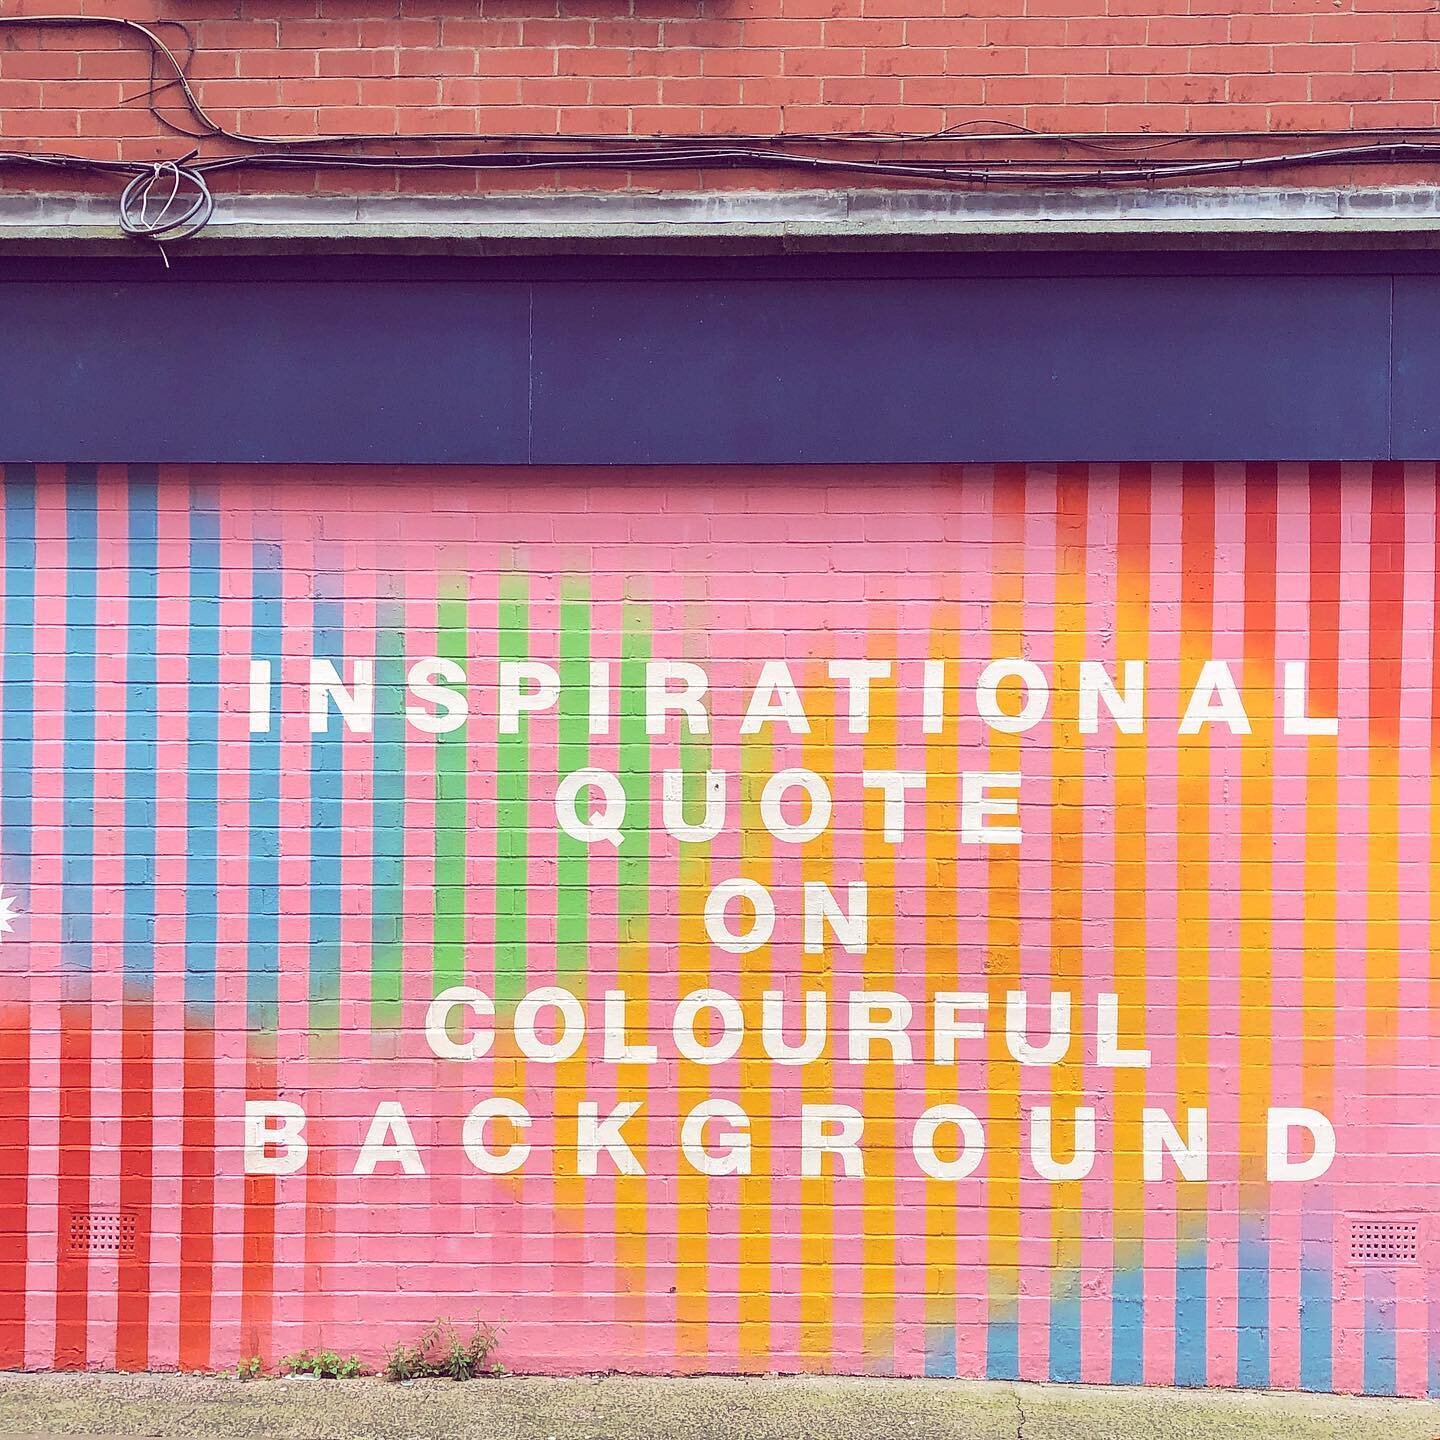 Fitting find in #manchester this week for #iwd2023 #embraceequity - inspirational quotes are one thing, but we need to do more than talk and be the change